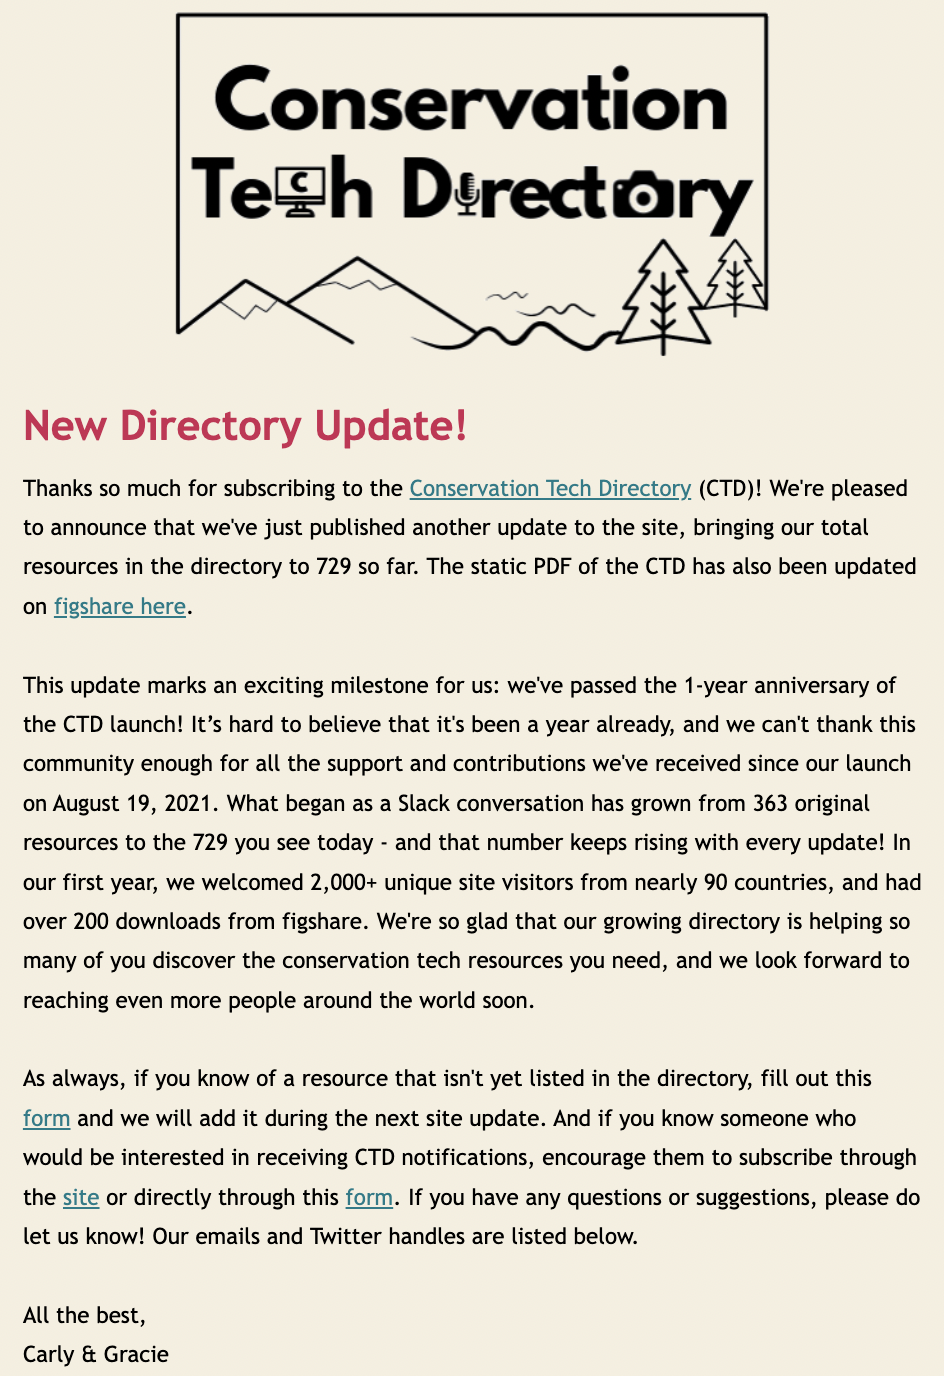 screenshot of email about conservation tech directory update